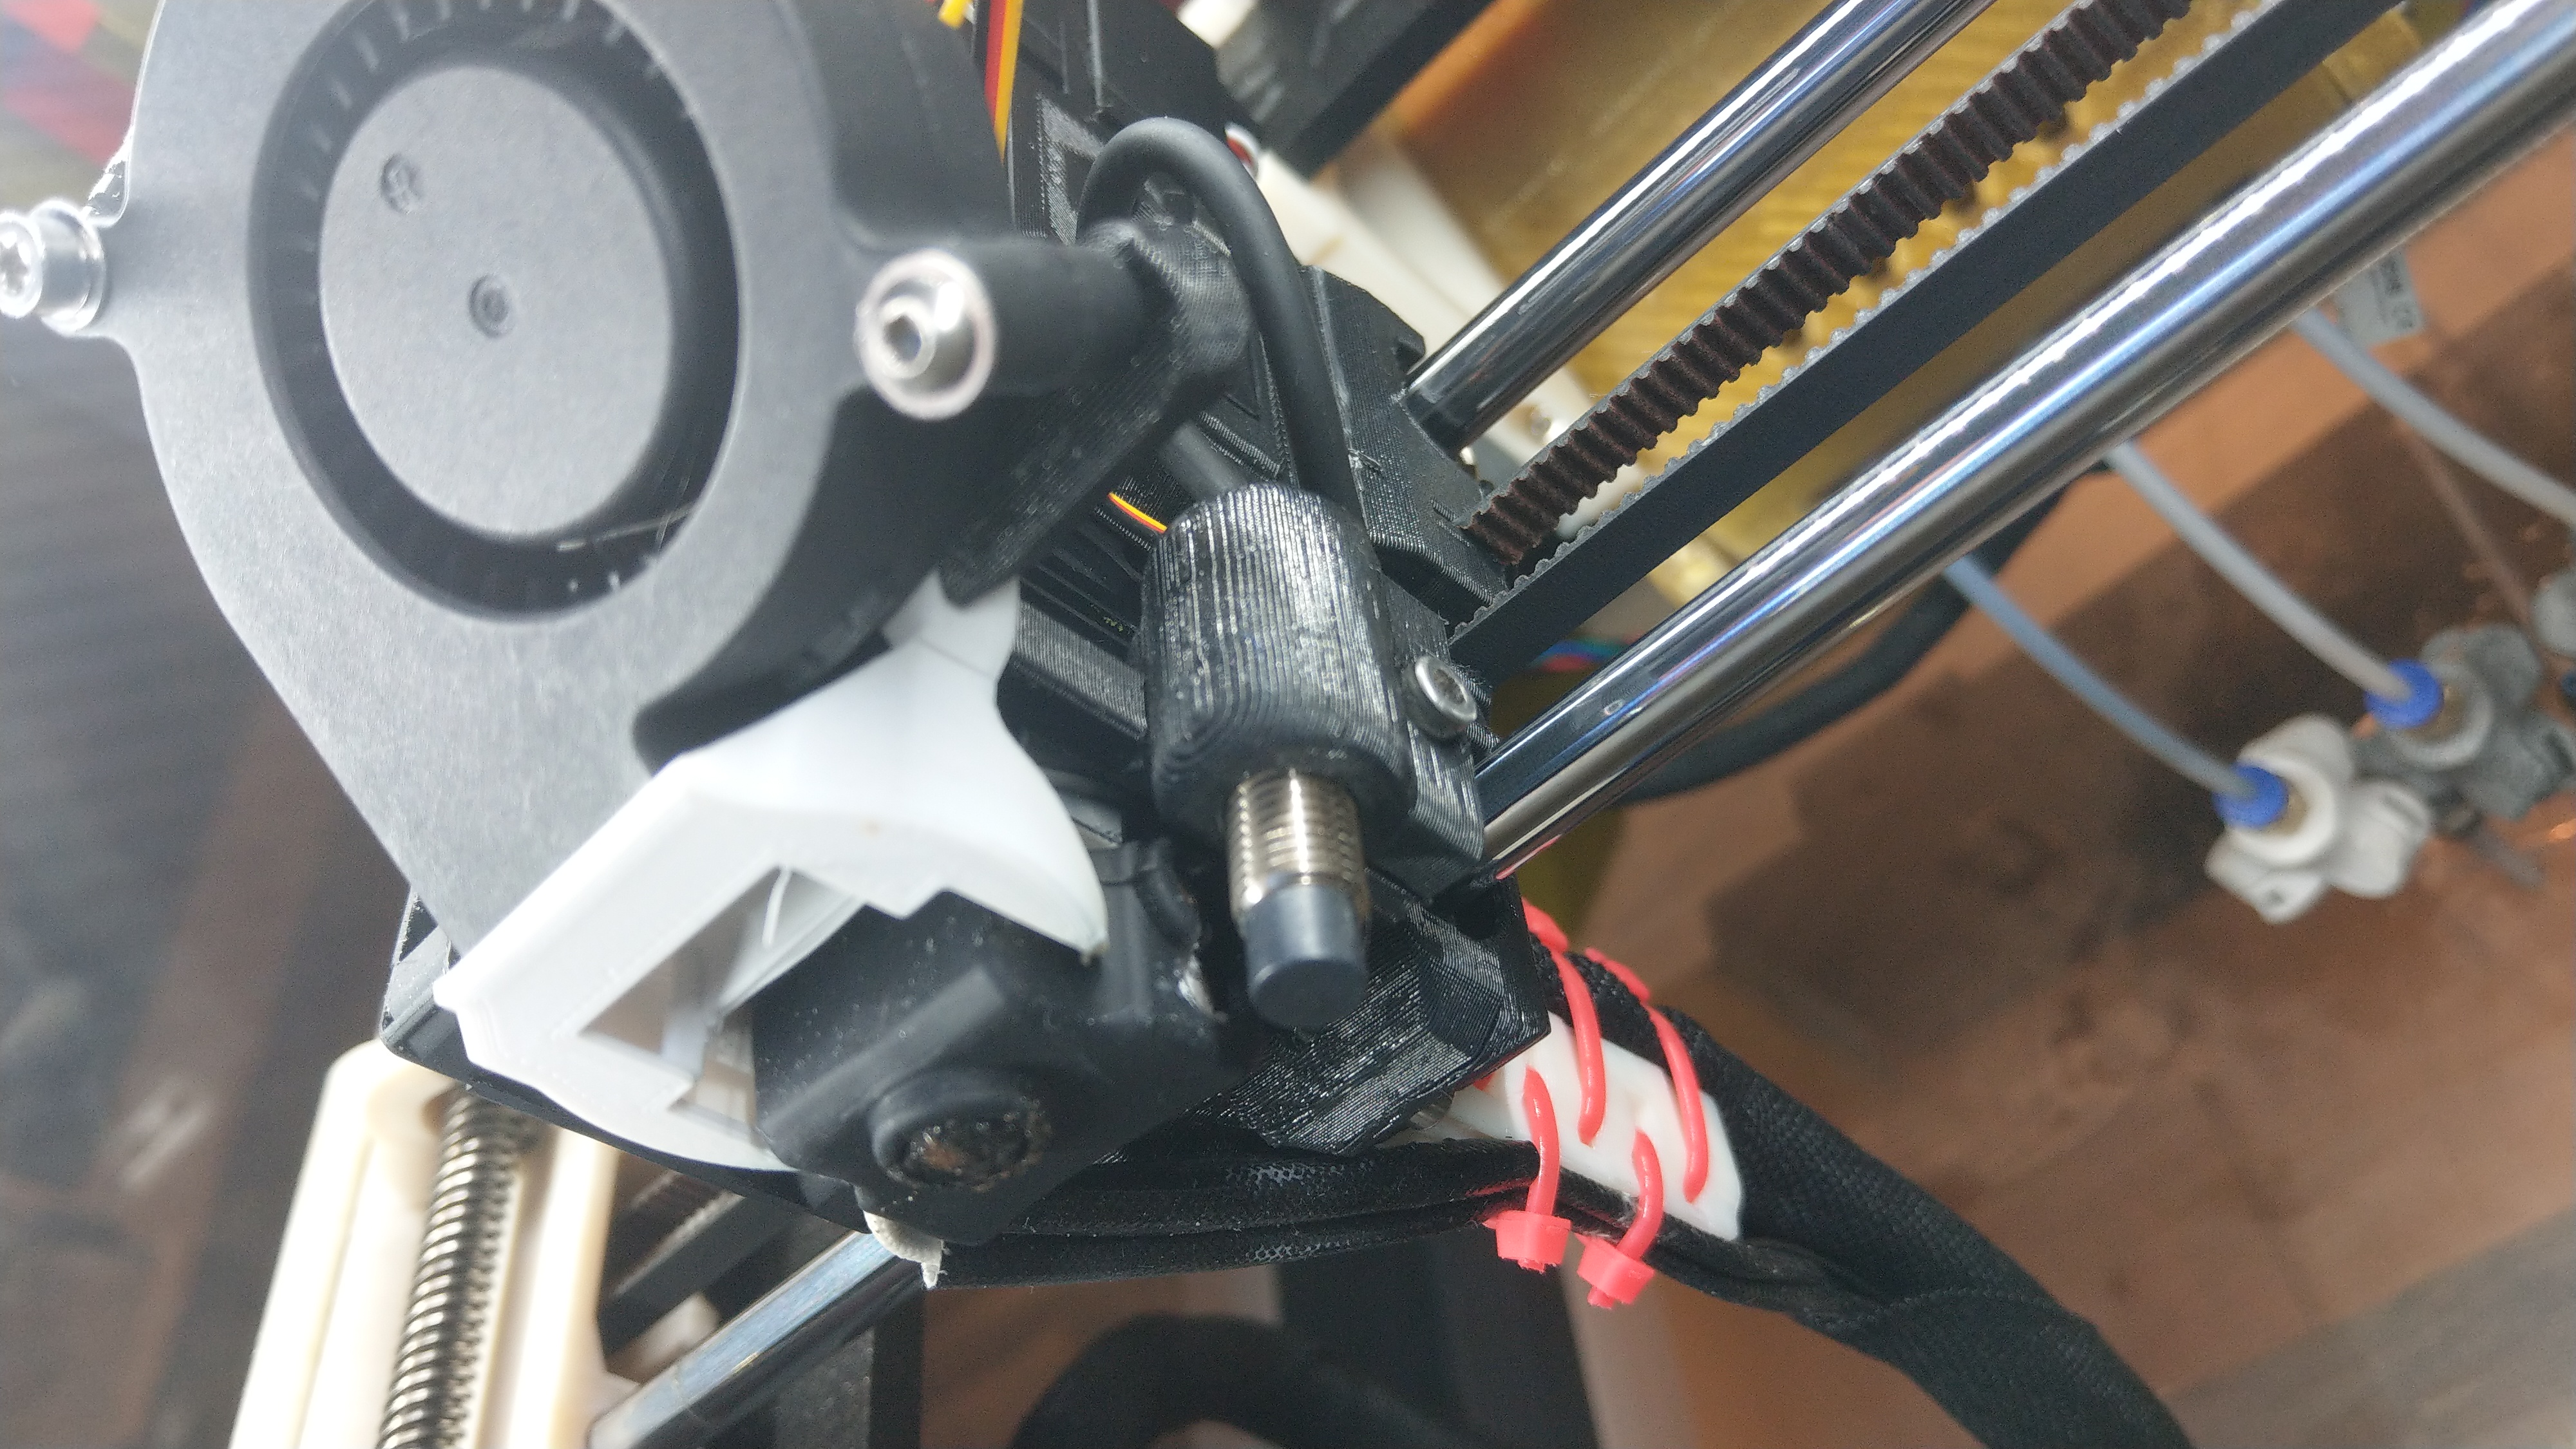 Modification of Original MK3S+ Extruder to fits Slice Engeneering Copperhead Hotend